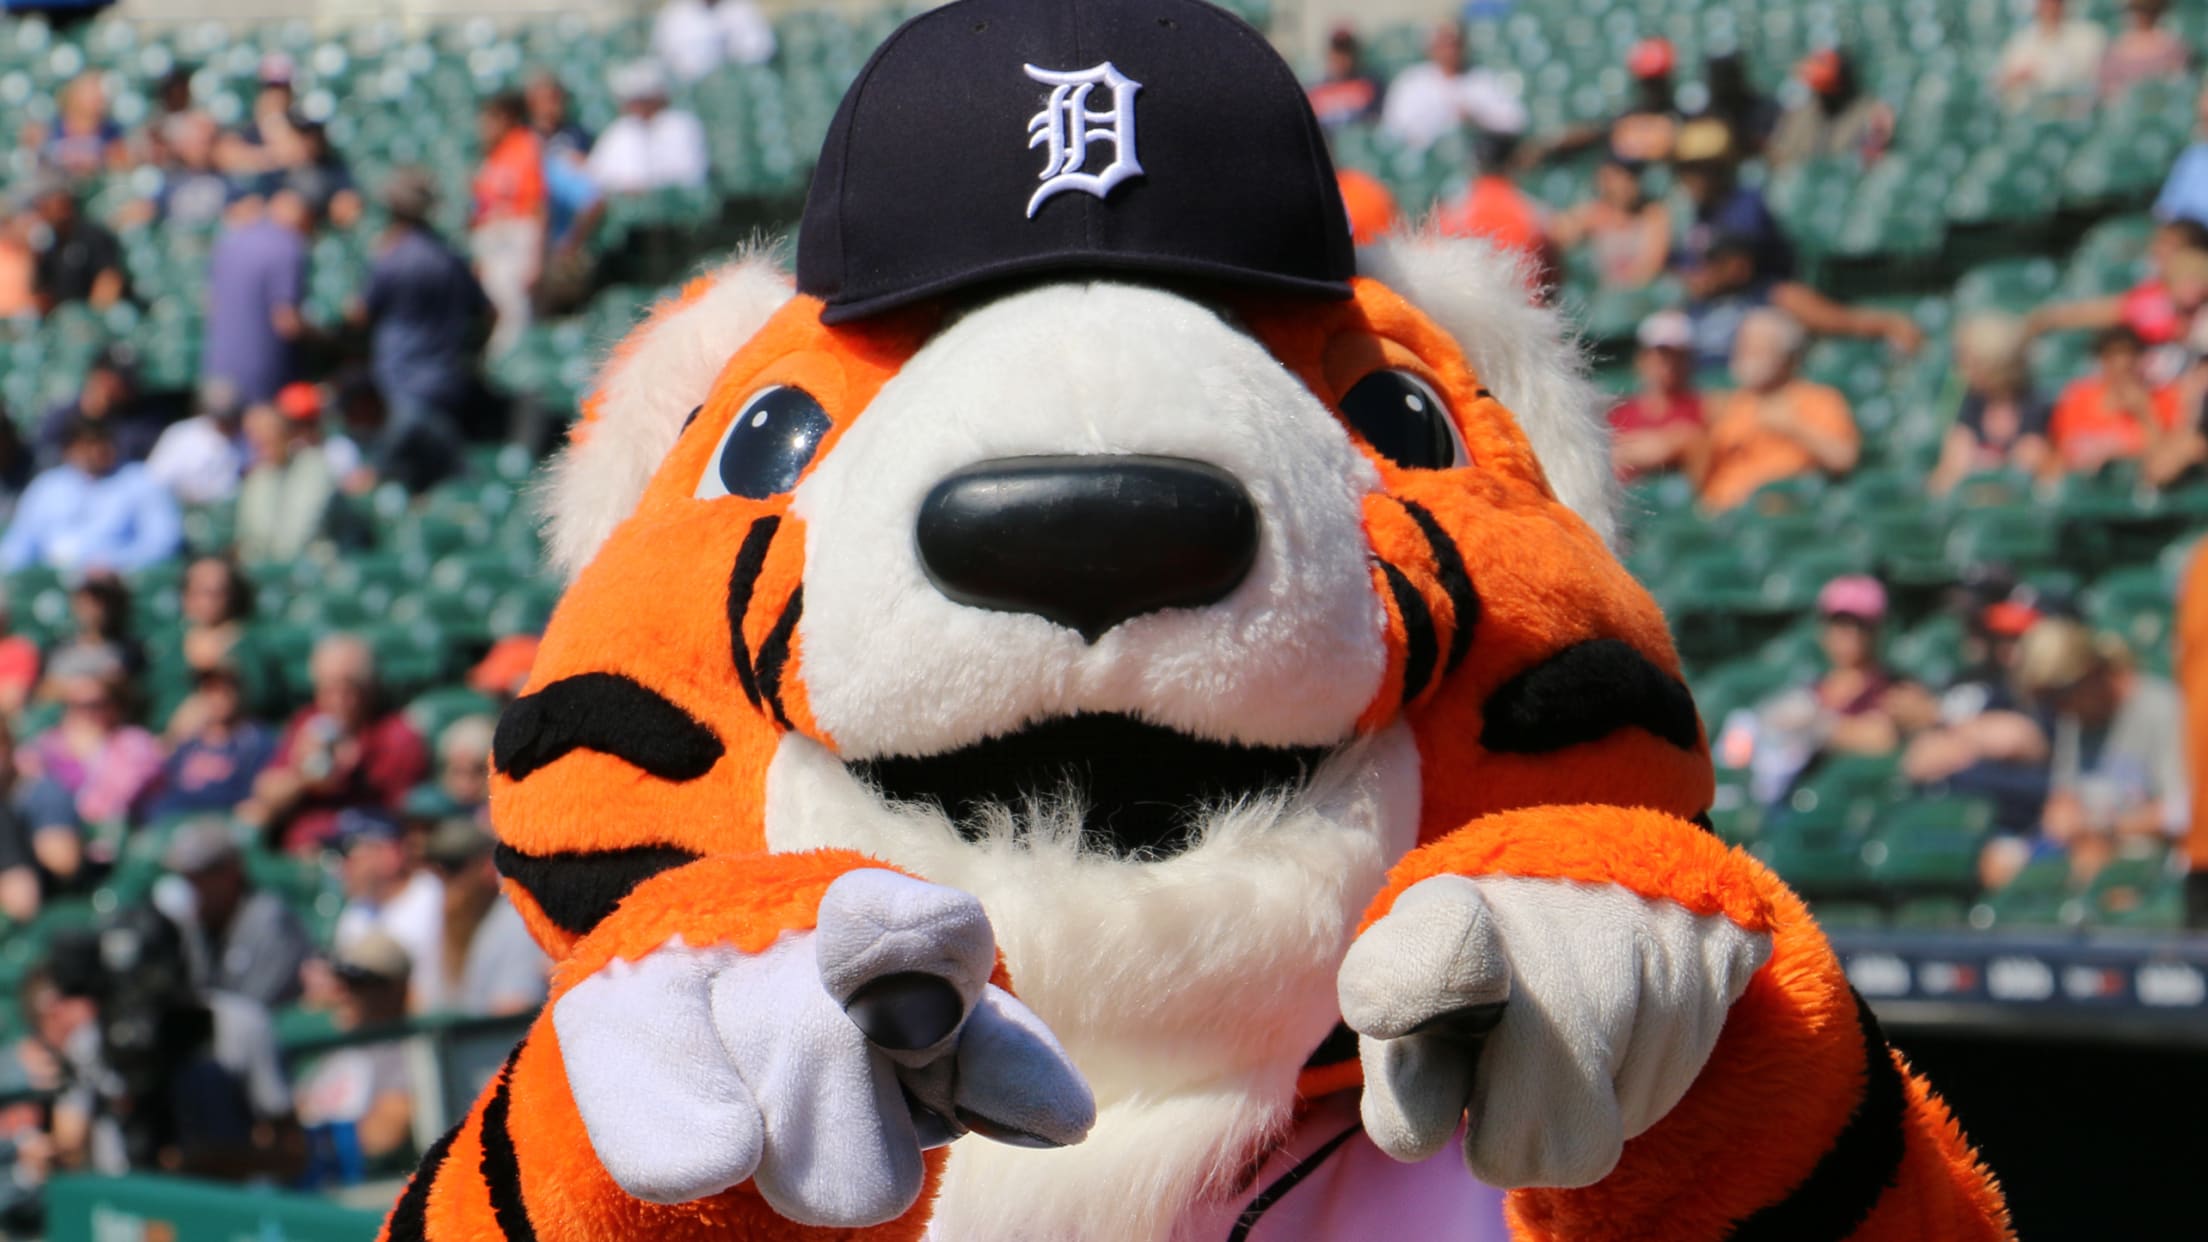 PAWS - The Official Mascot of the Detroit Tigers, tigers.com: Fan Forum